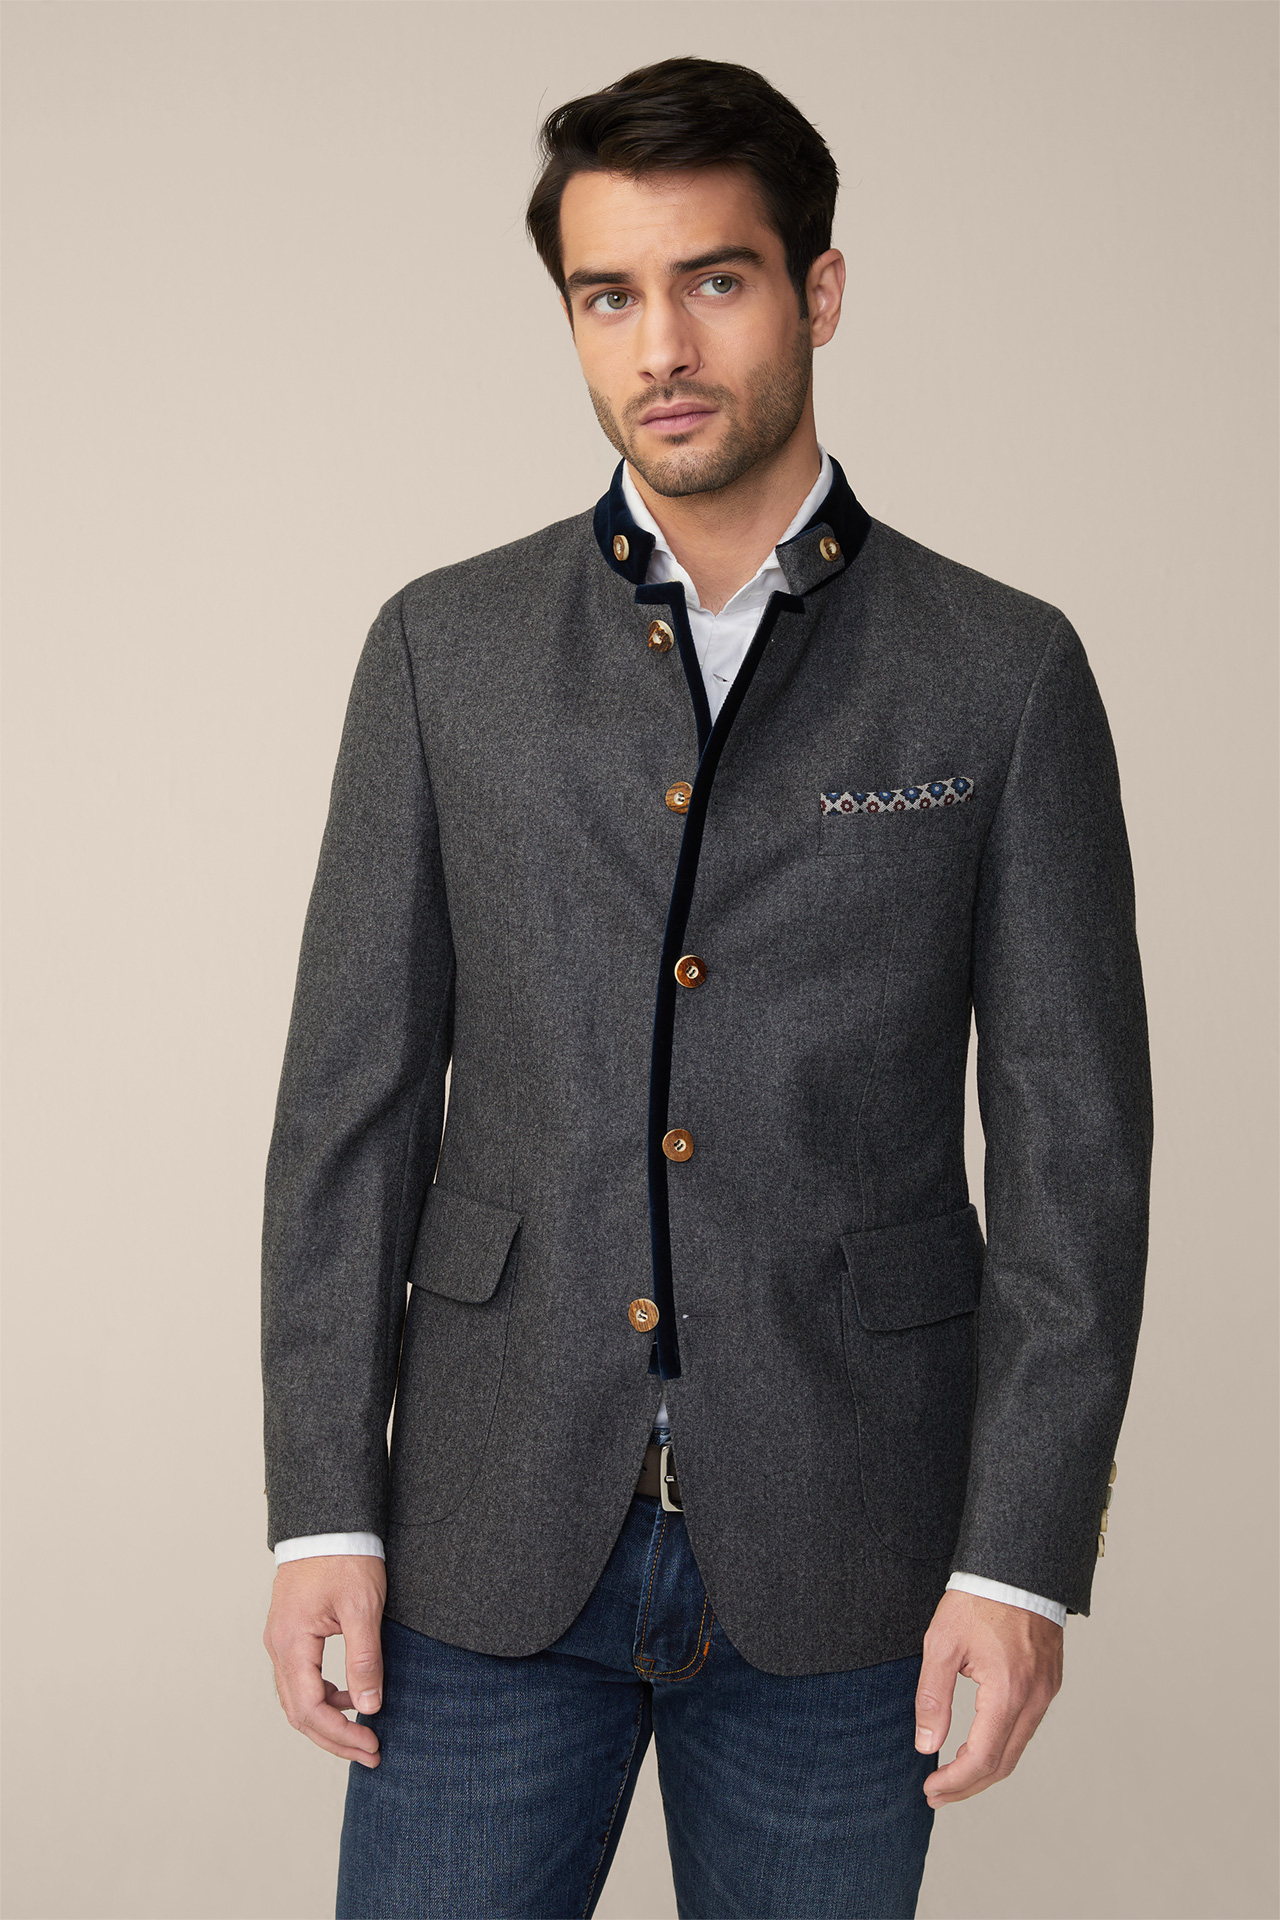 Sendling Trachtenjanker Traditional Jacket in Grey and Navy